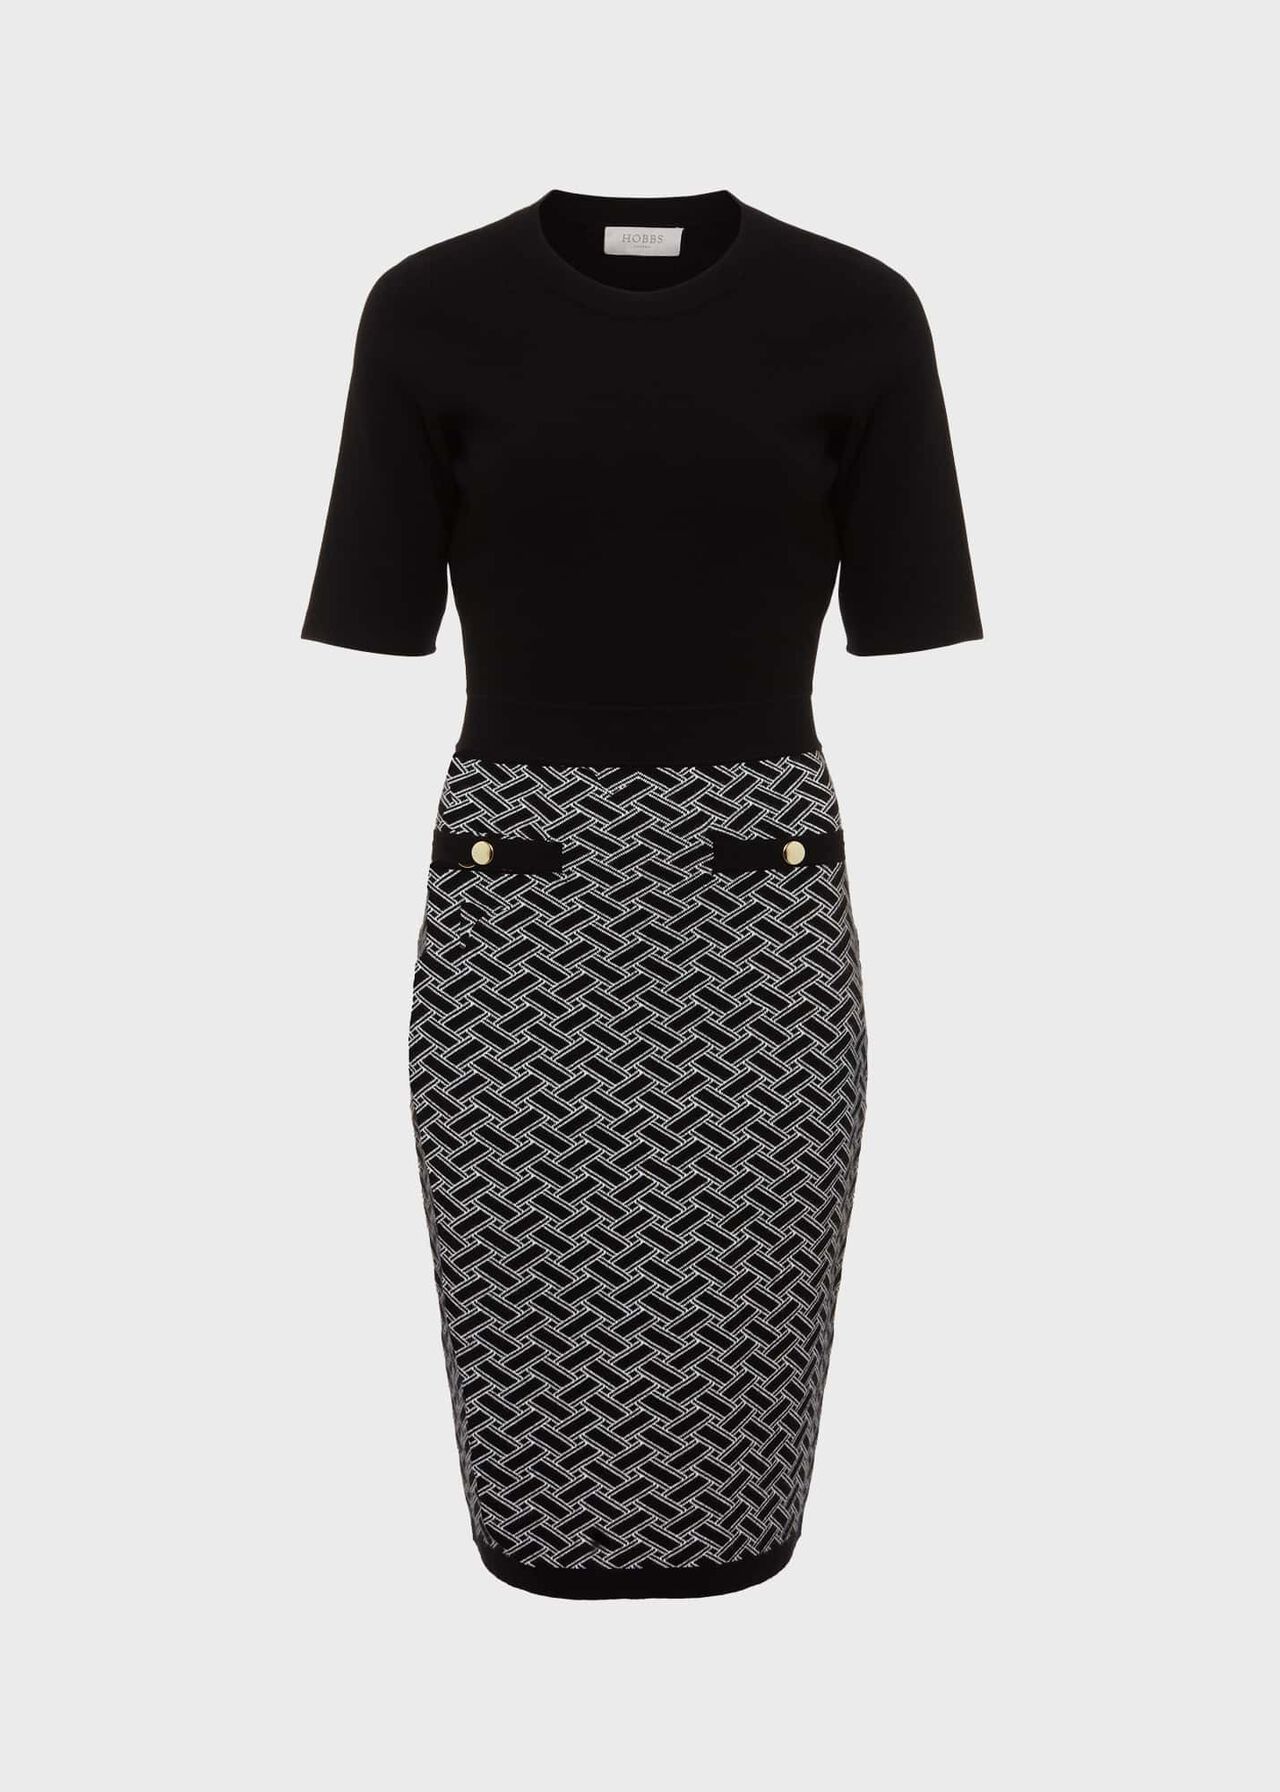 Perrie Knitted Dress, Black Ivory, hi-res